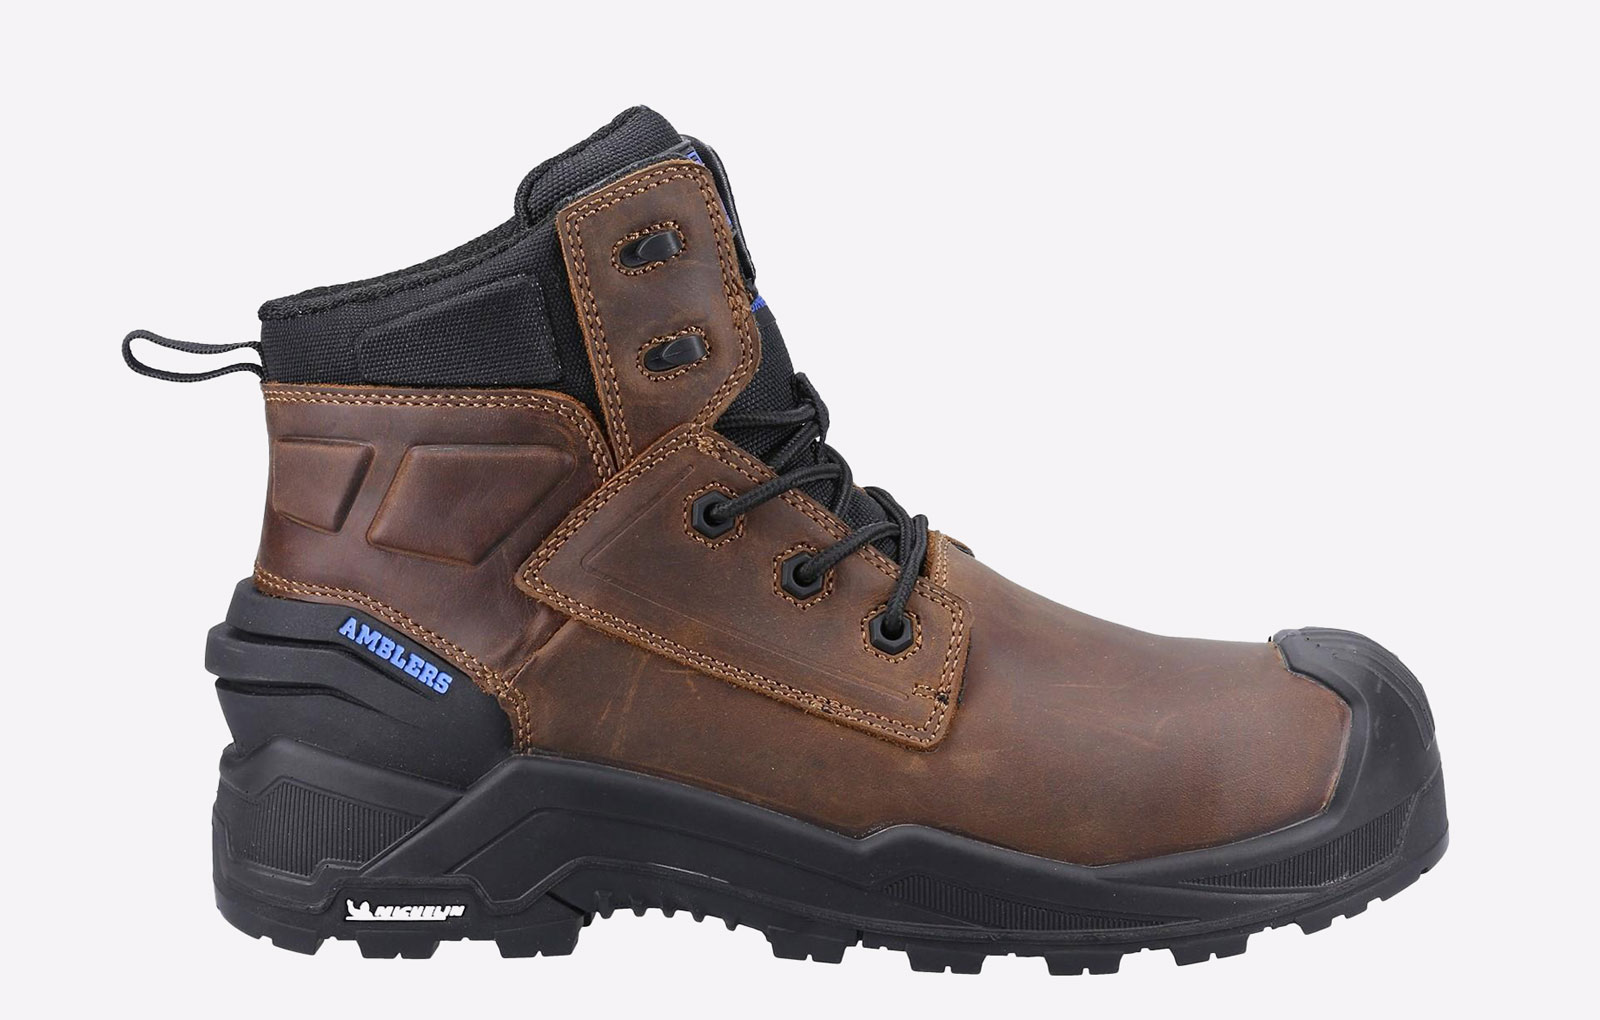 Amblers 980C WATERPROOF Safety Boots Mens - GRD-37409-69763-14